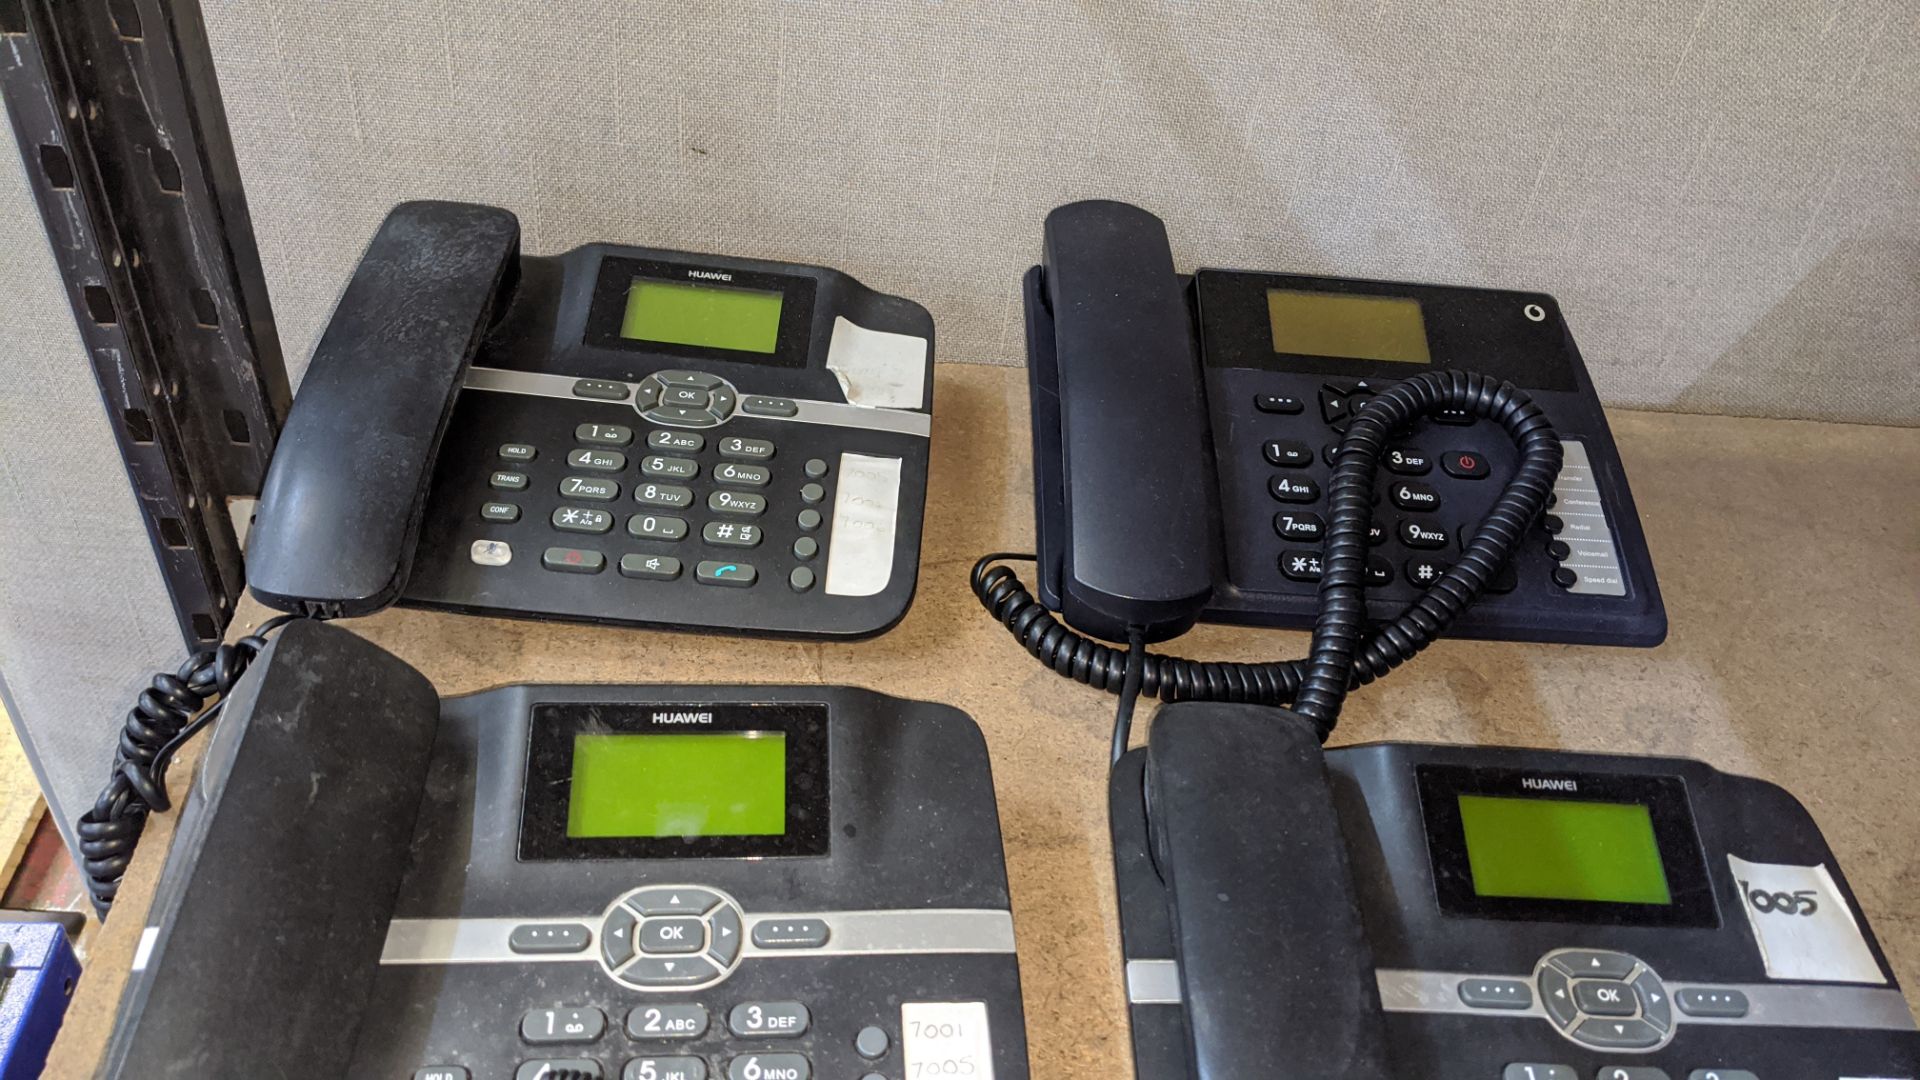 5 off Huawei telephone handsets model F610 plus DECT telephone handset & charging station. NB this - Image 5 of 5